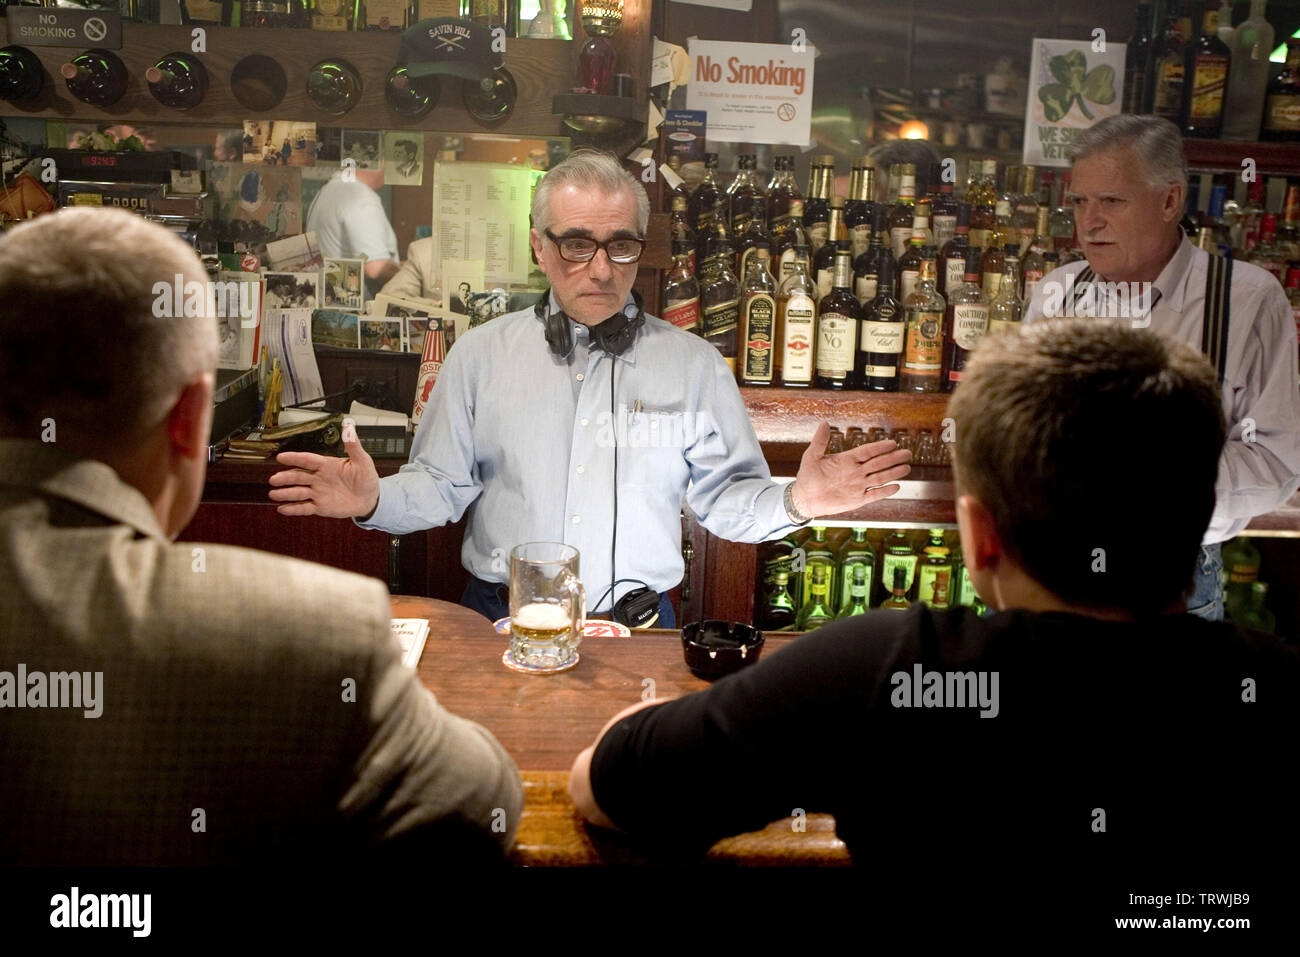 MARTIN SCORSESE and LEONARDO DICAPRIO in THE DEPARTED (2006). Copyright: Editorial use only. No merchandising or book covers. This is a publicly distributed handout. Access rights only, no license of copyright provided. Only to be reproduced in conjunction with promotion of this film. Credit: WARNER BROS PICTURES/VERTIGO ENTERTAINMENT/INITIAL ENTERTAIN / COOPER, ANDREW / Album Stock Photo